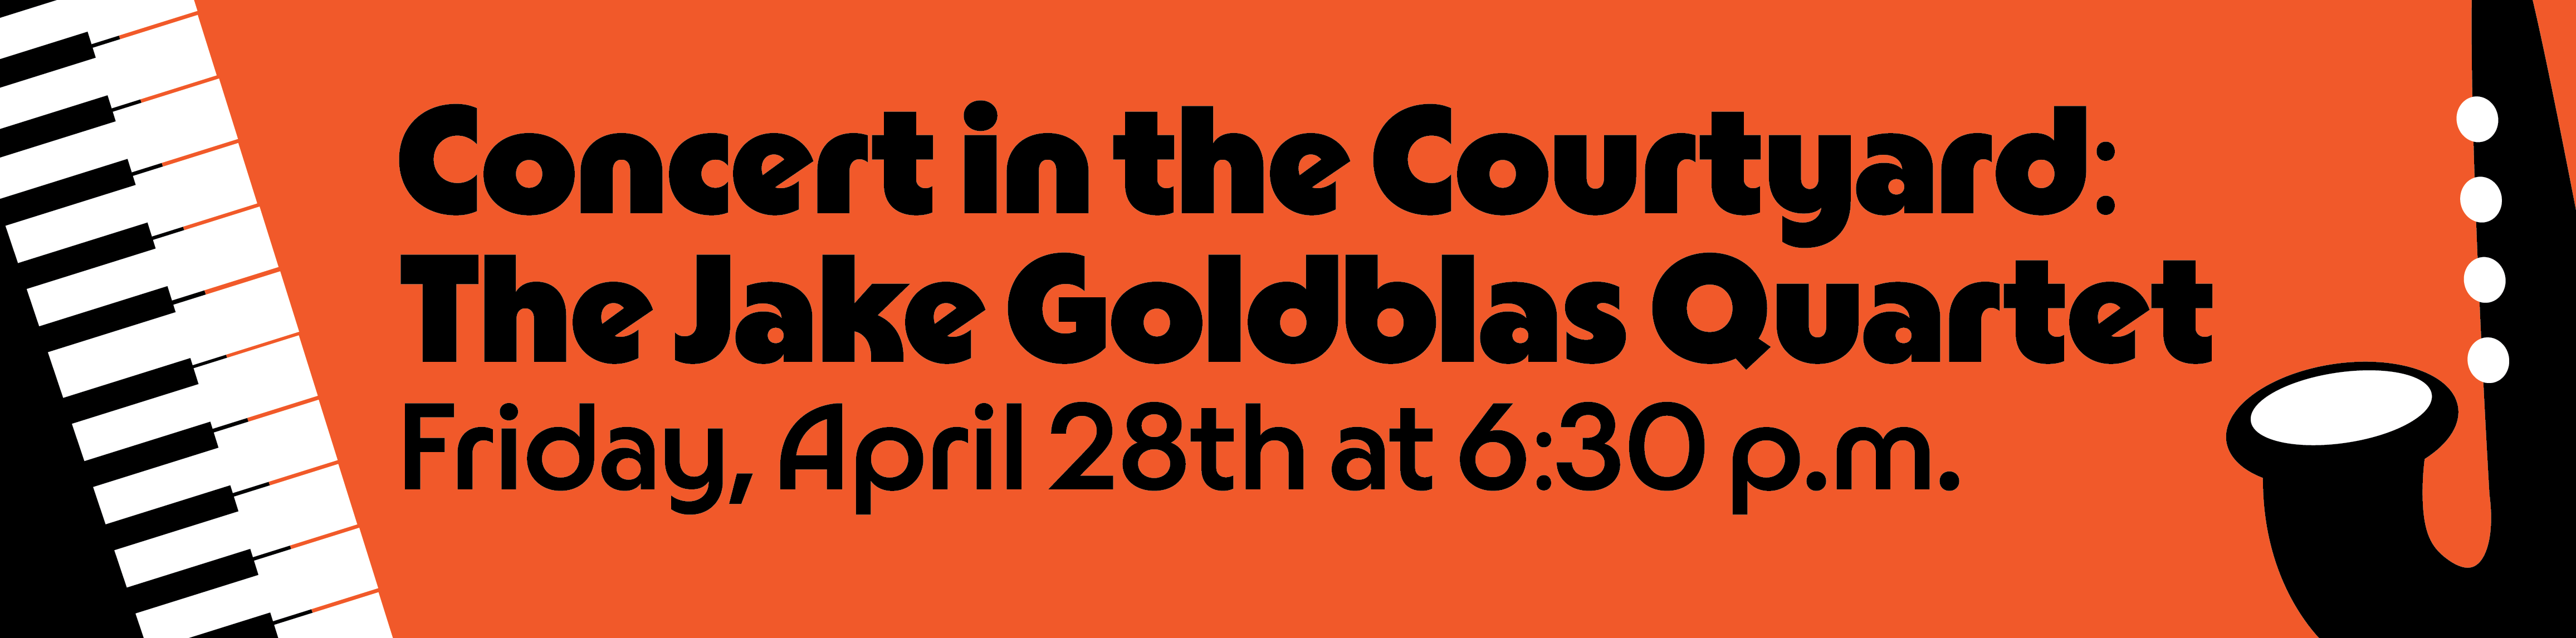 Concert in the Courtyard: The Jake Goldblas Quartet on Friday, April 28th at 6:30 p.m.